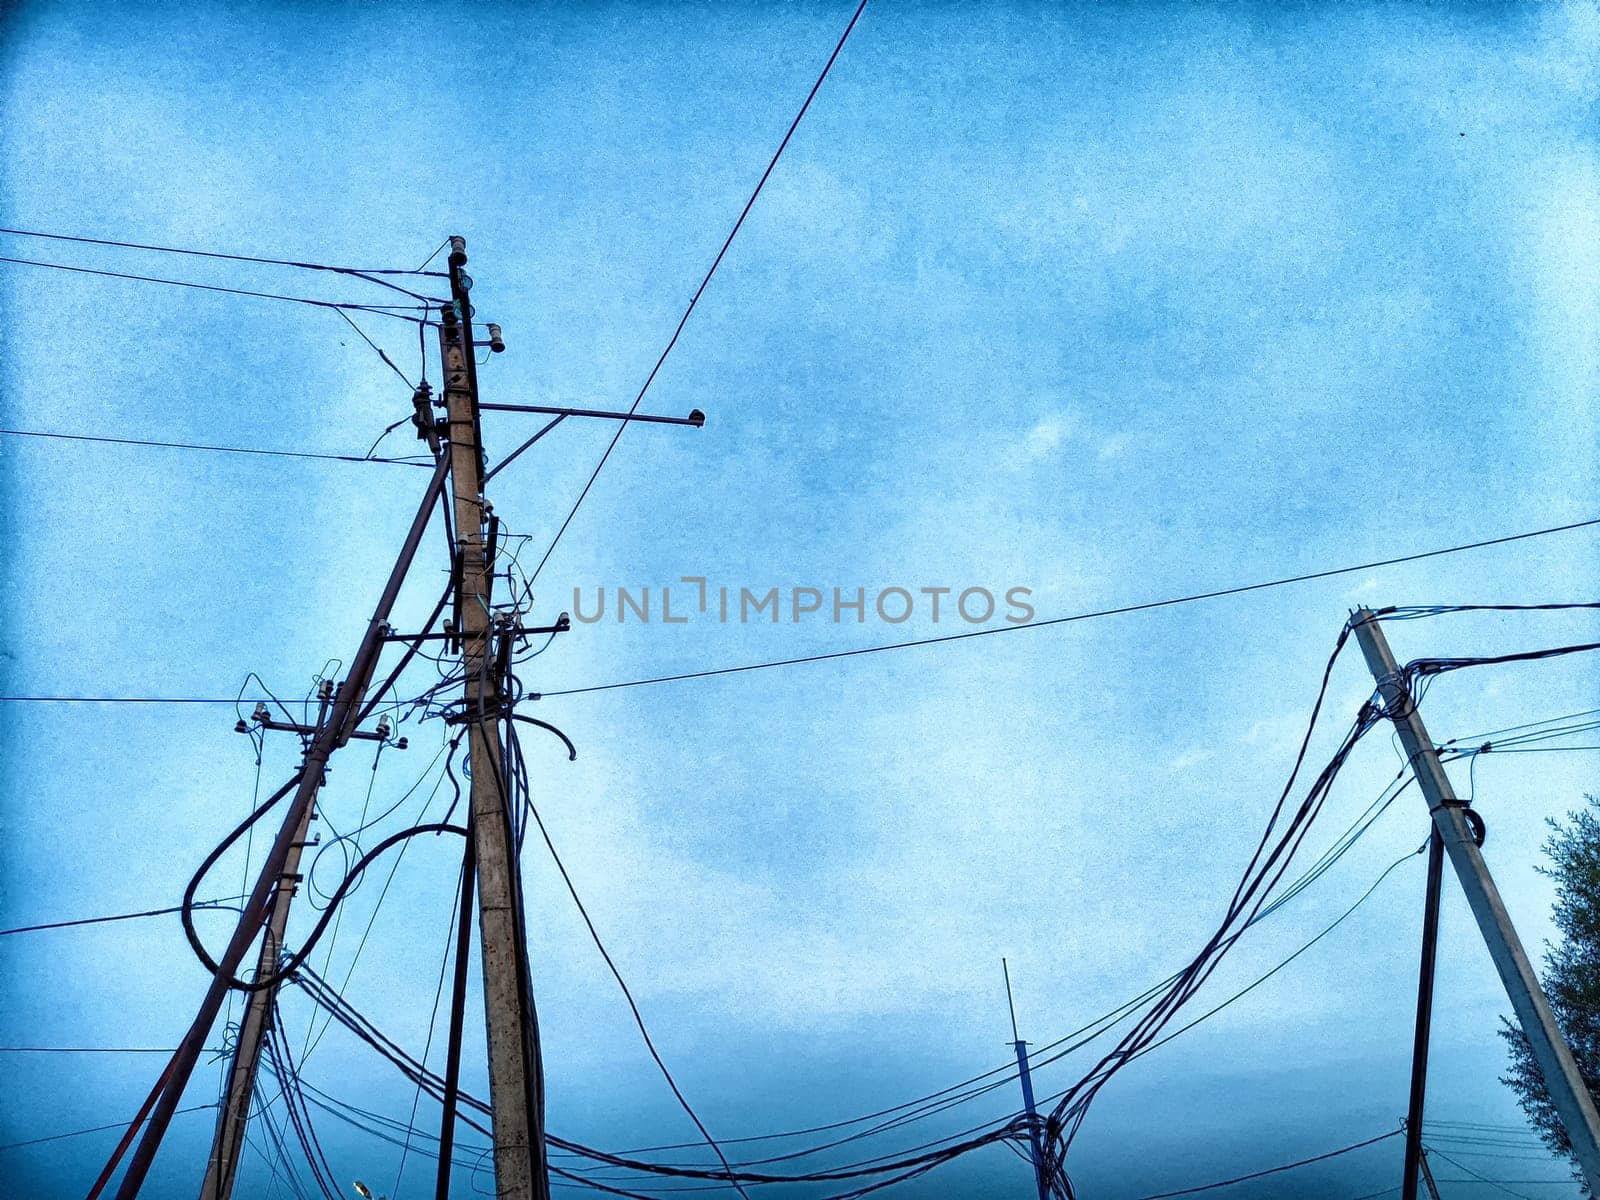 Old pole with wires against the sky. Electric transmission line. Eco-friendly energy by keleny